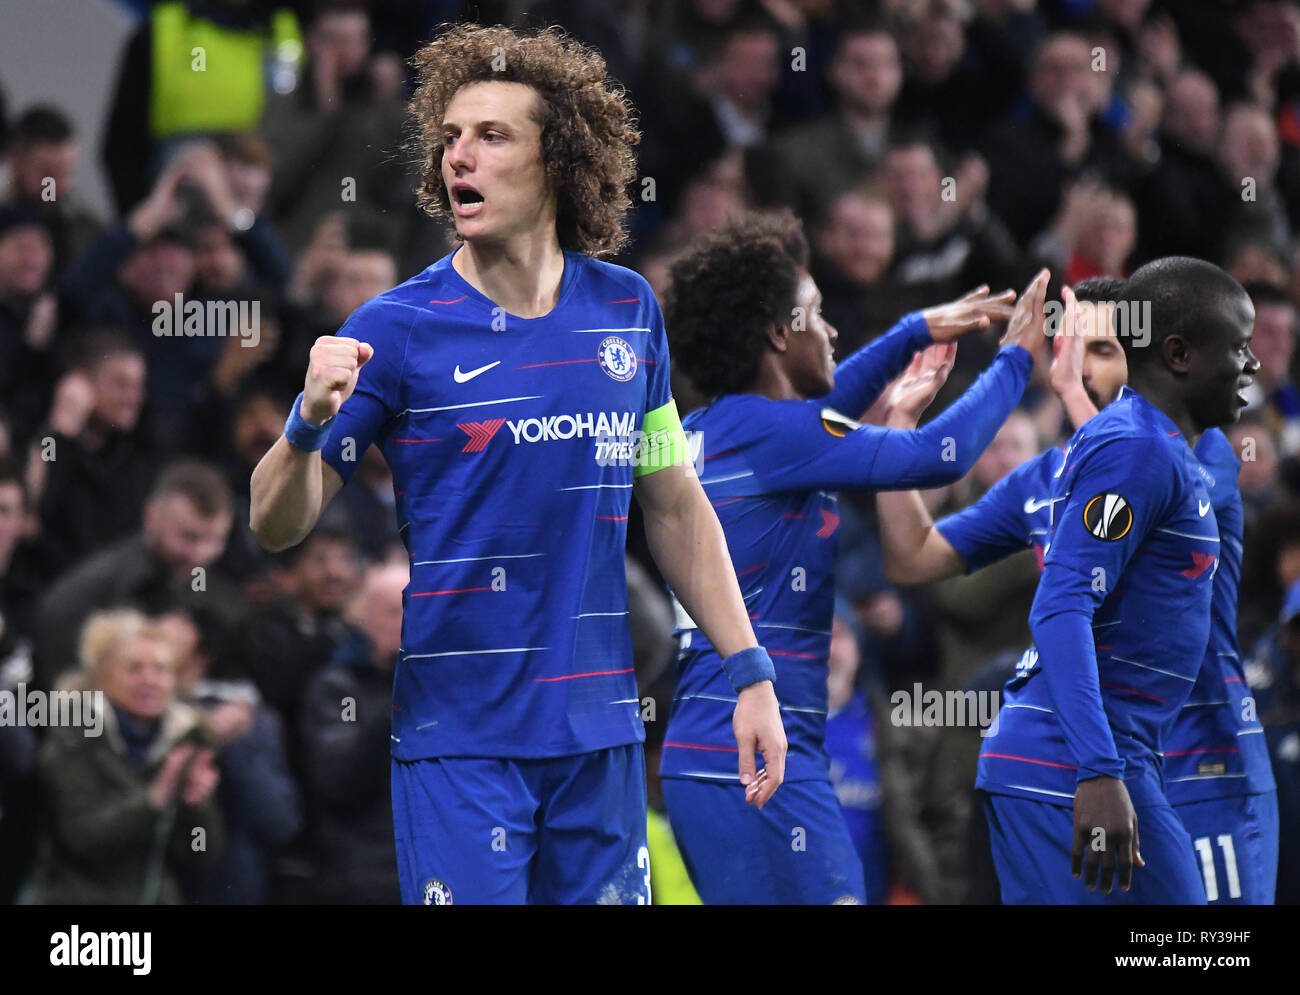 LONDON, ENGLAND - MARCH 7, 2019: David Luiz of Chelsea celebrates after Willian Borges da Silva of Chelsea scored a goal during the first leg of the 2018/19 UEFA Europa League Last 16 Round game between Chelsea FC (England) and Dynamo Kyiv (Ukraine) at Stamford Bridge. Stock Photo